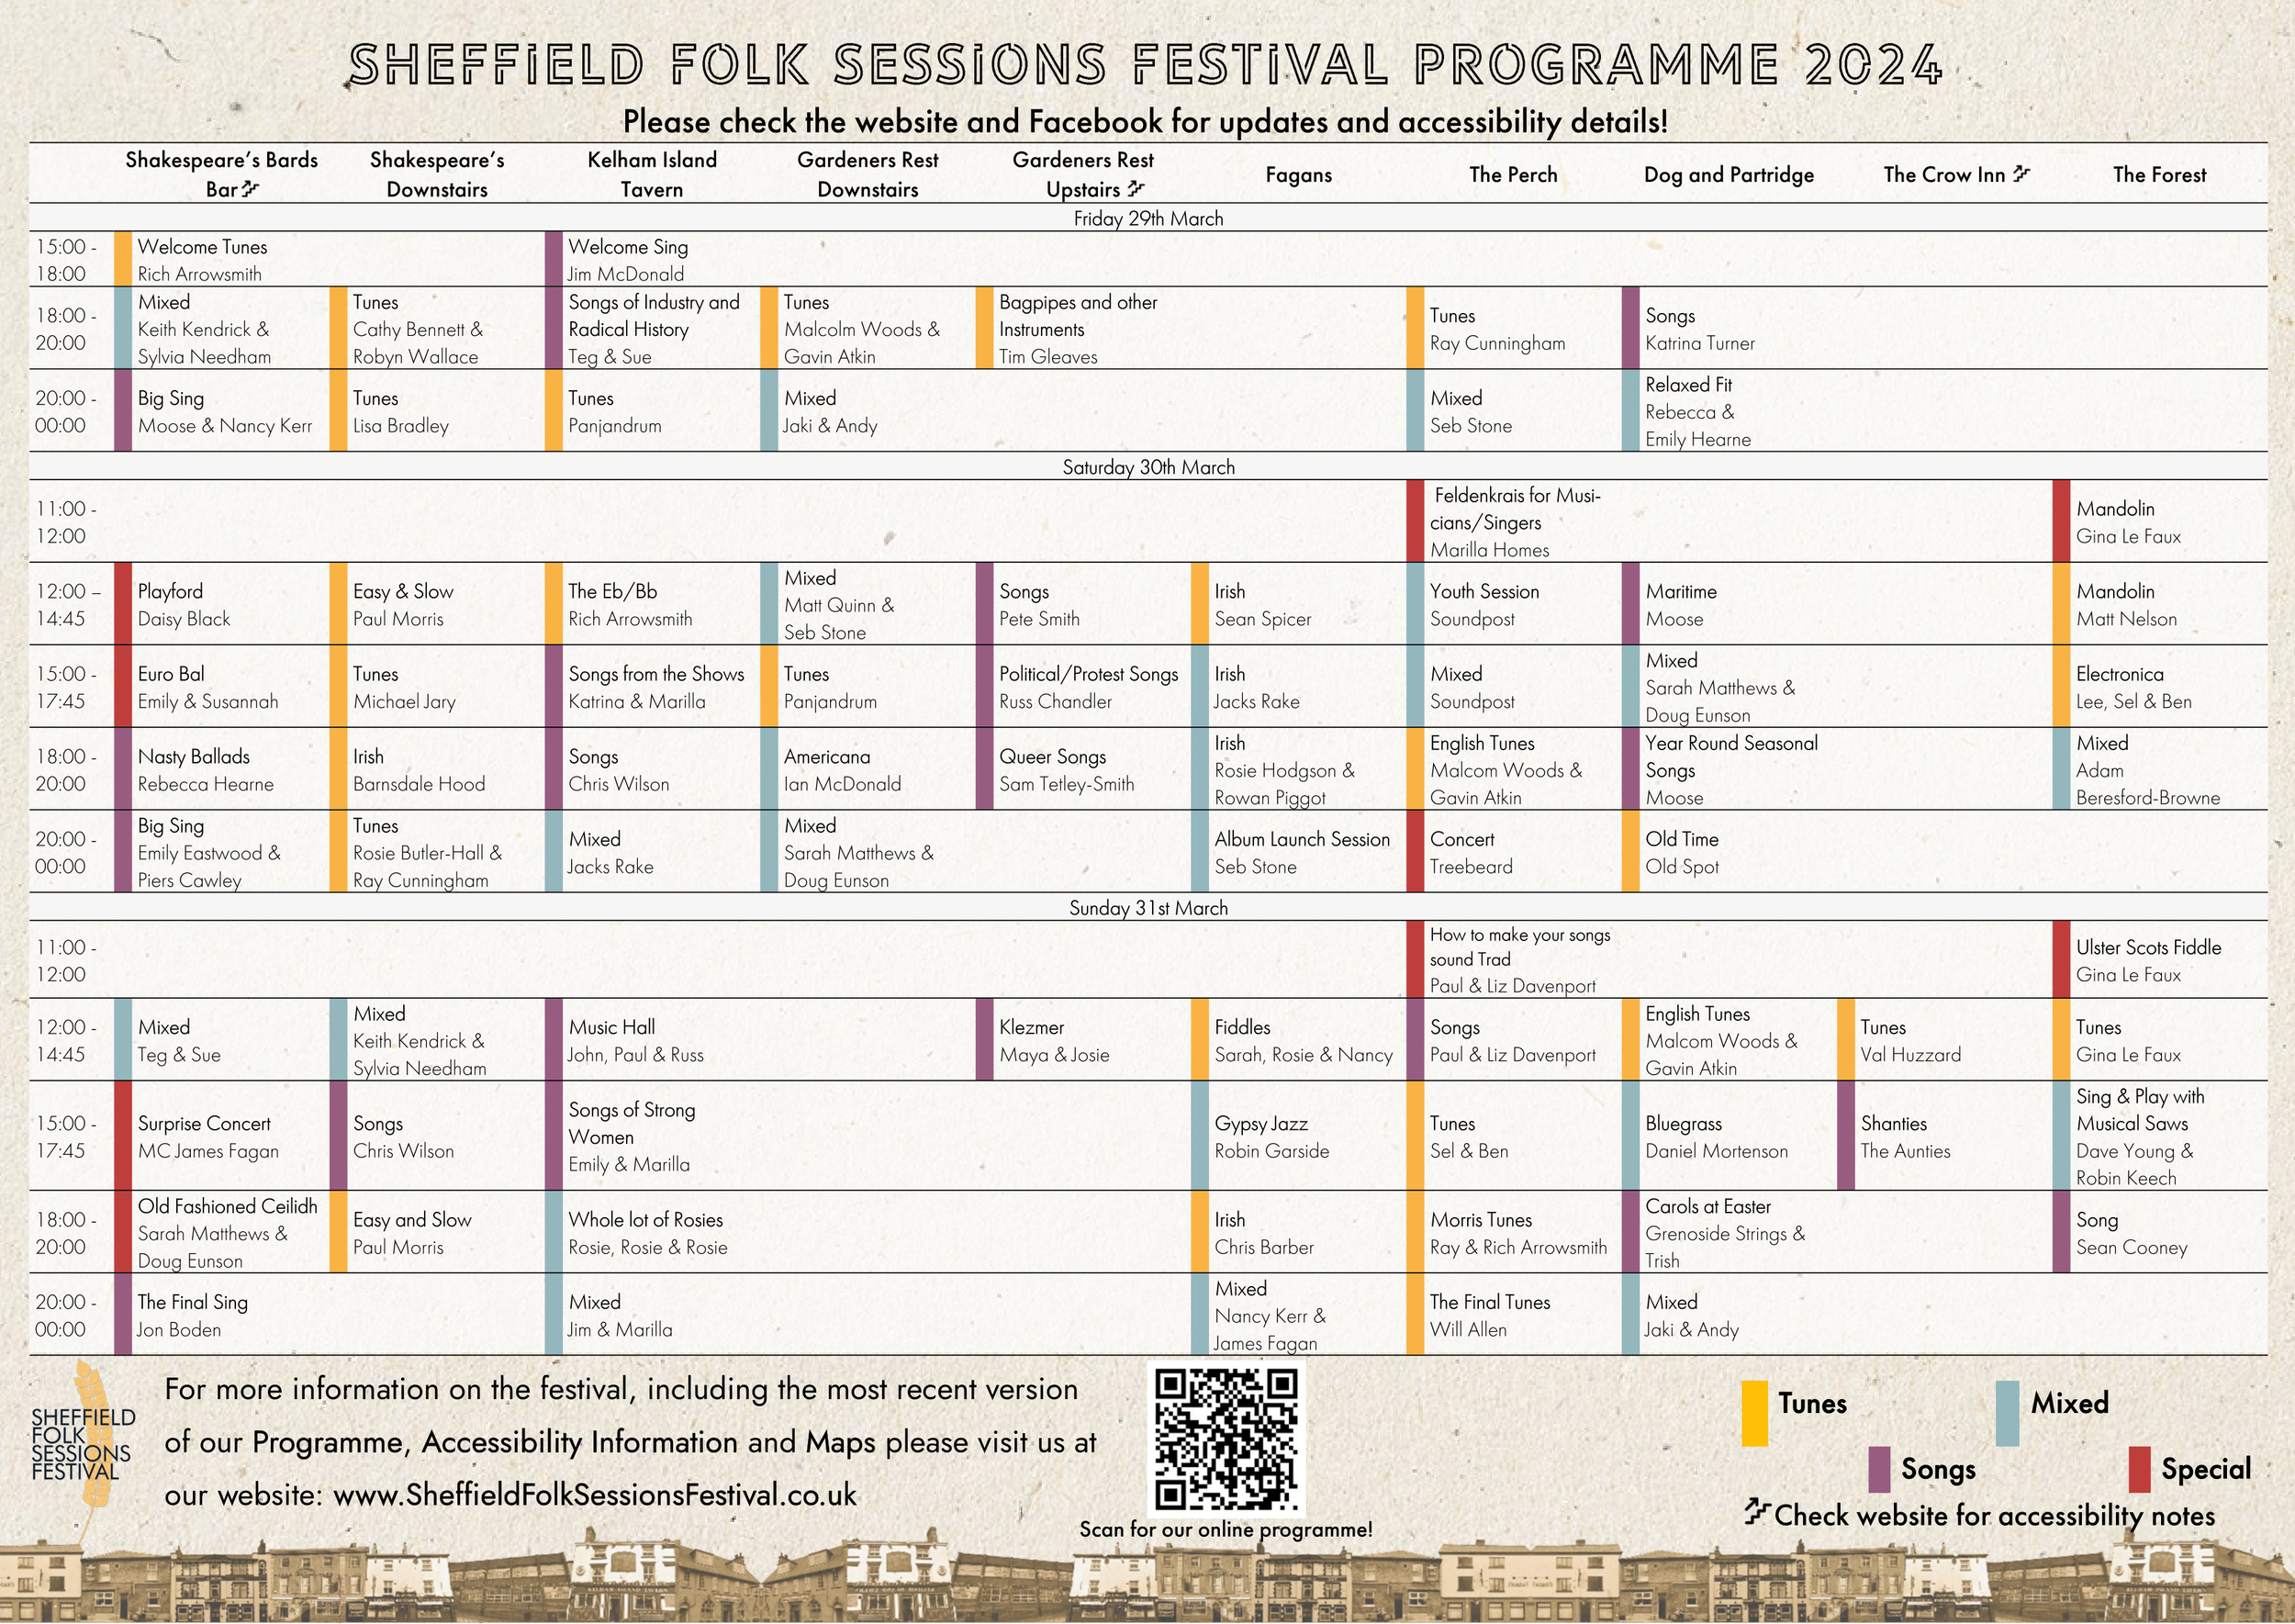 Sessions Festival Programme 2024 A3 Final-1.png